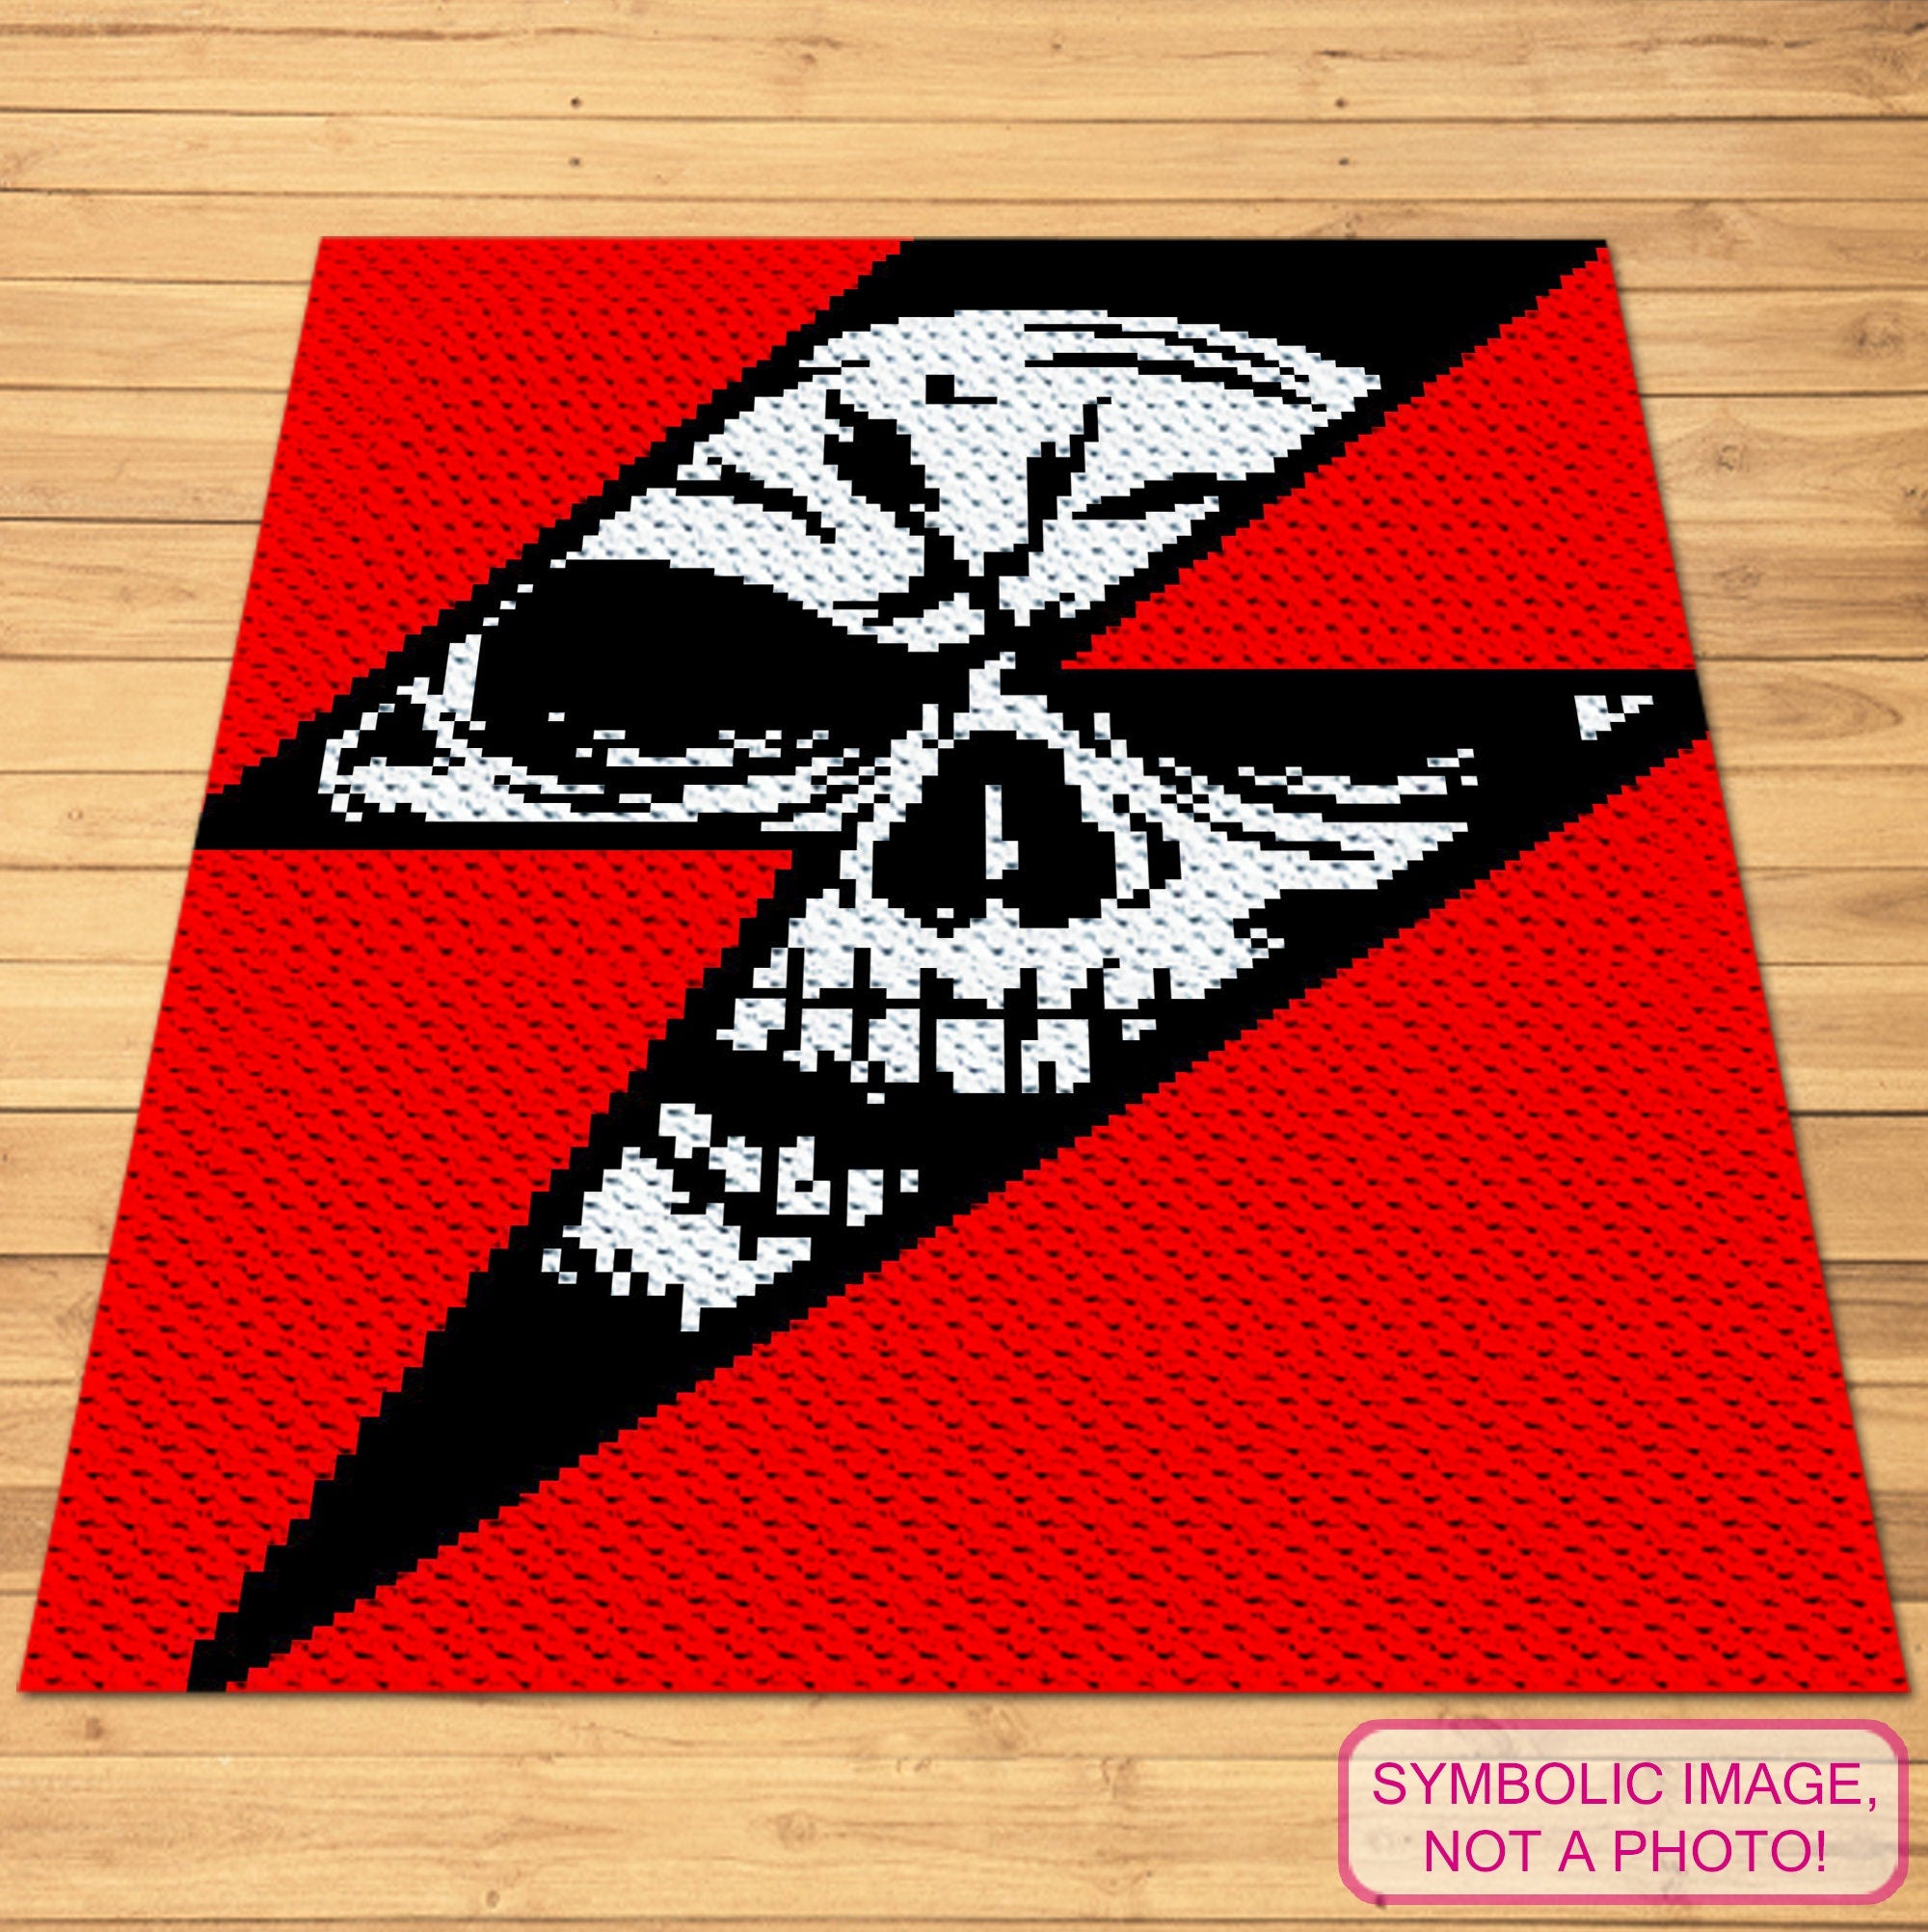 Transform your home into a haunted haven with my Halloween Crochet Blanket Pattern! Let the skull in a lightning design give your space an eerie allure. Dive into the art of crochet and create a chillingly captivating blanket that will enchant all who see it. Don't miss your chance to weave a little Halloween magic — click to download the pattern now and start crocheting. 